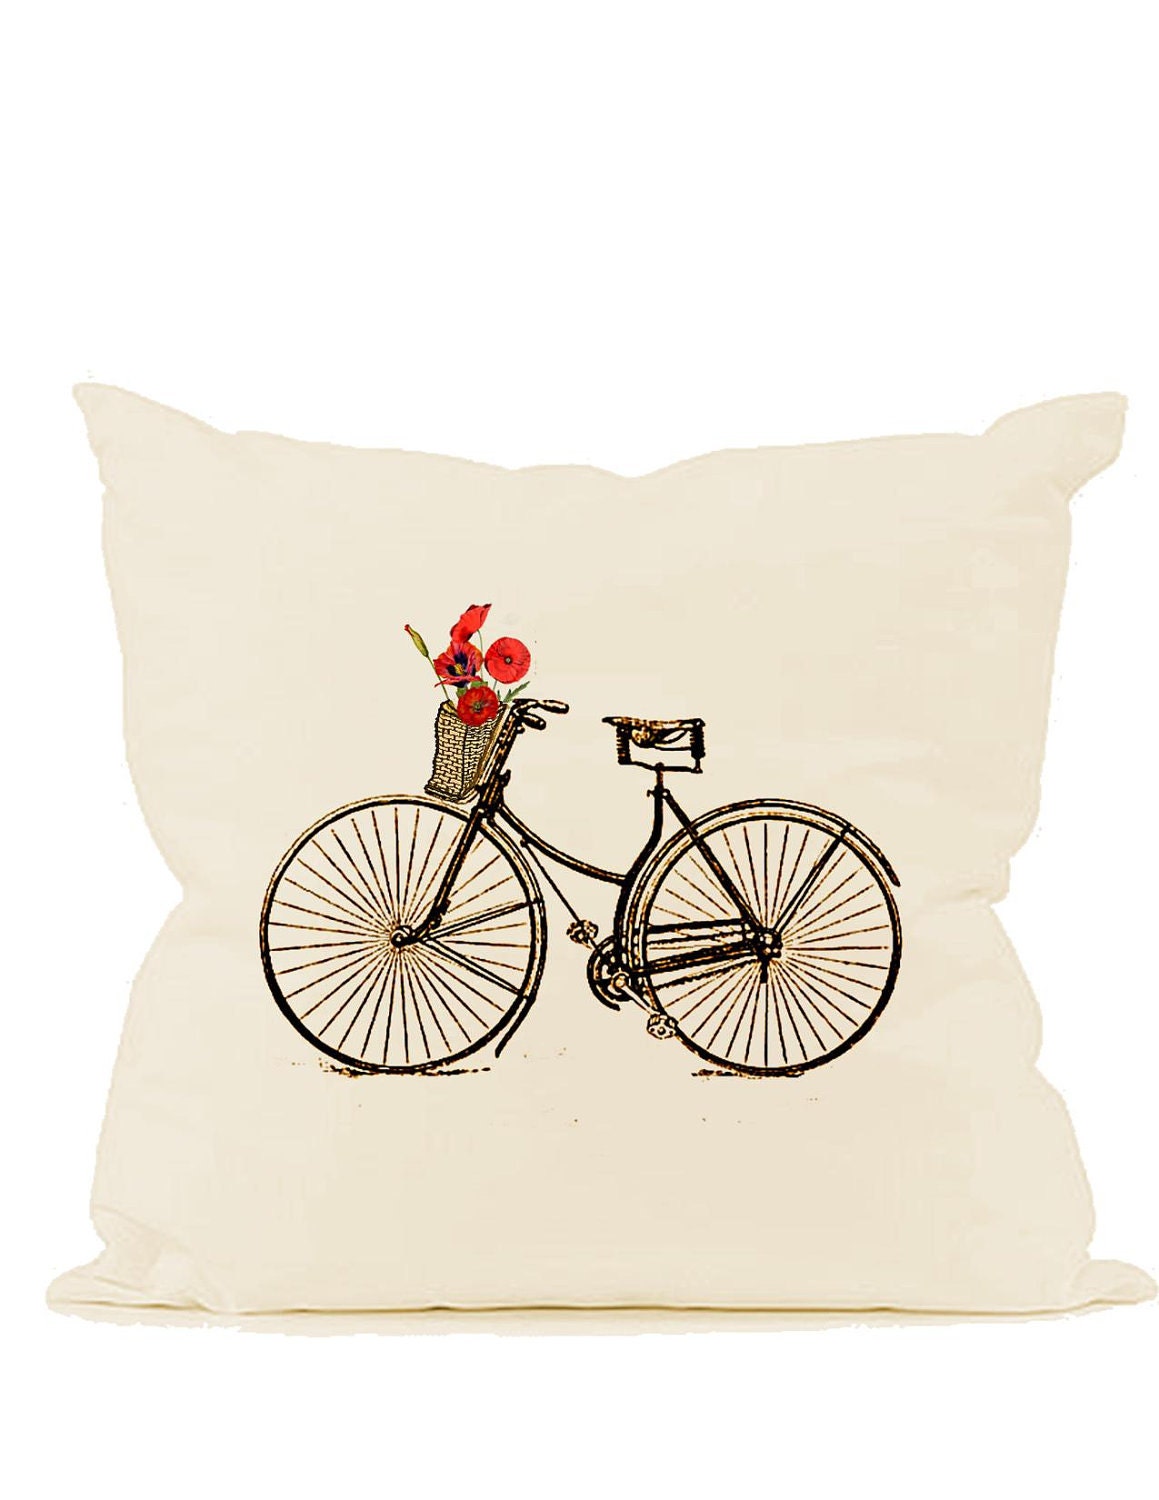 Vintage bicycle digital download image Basket Orange Poppies with or without Paris Streets transfer to fabric paper pillows burlap No. 586